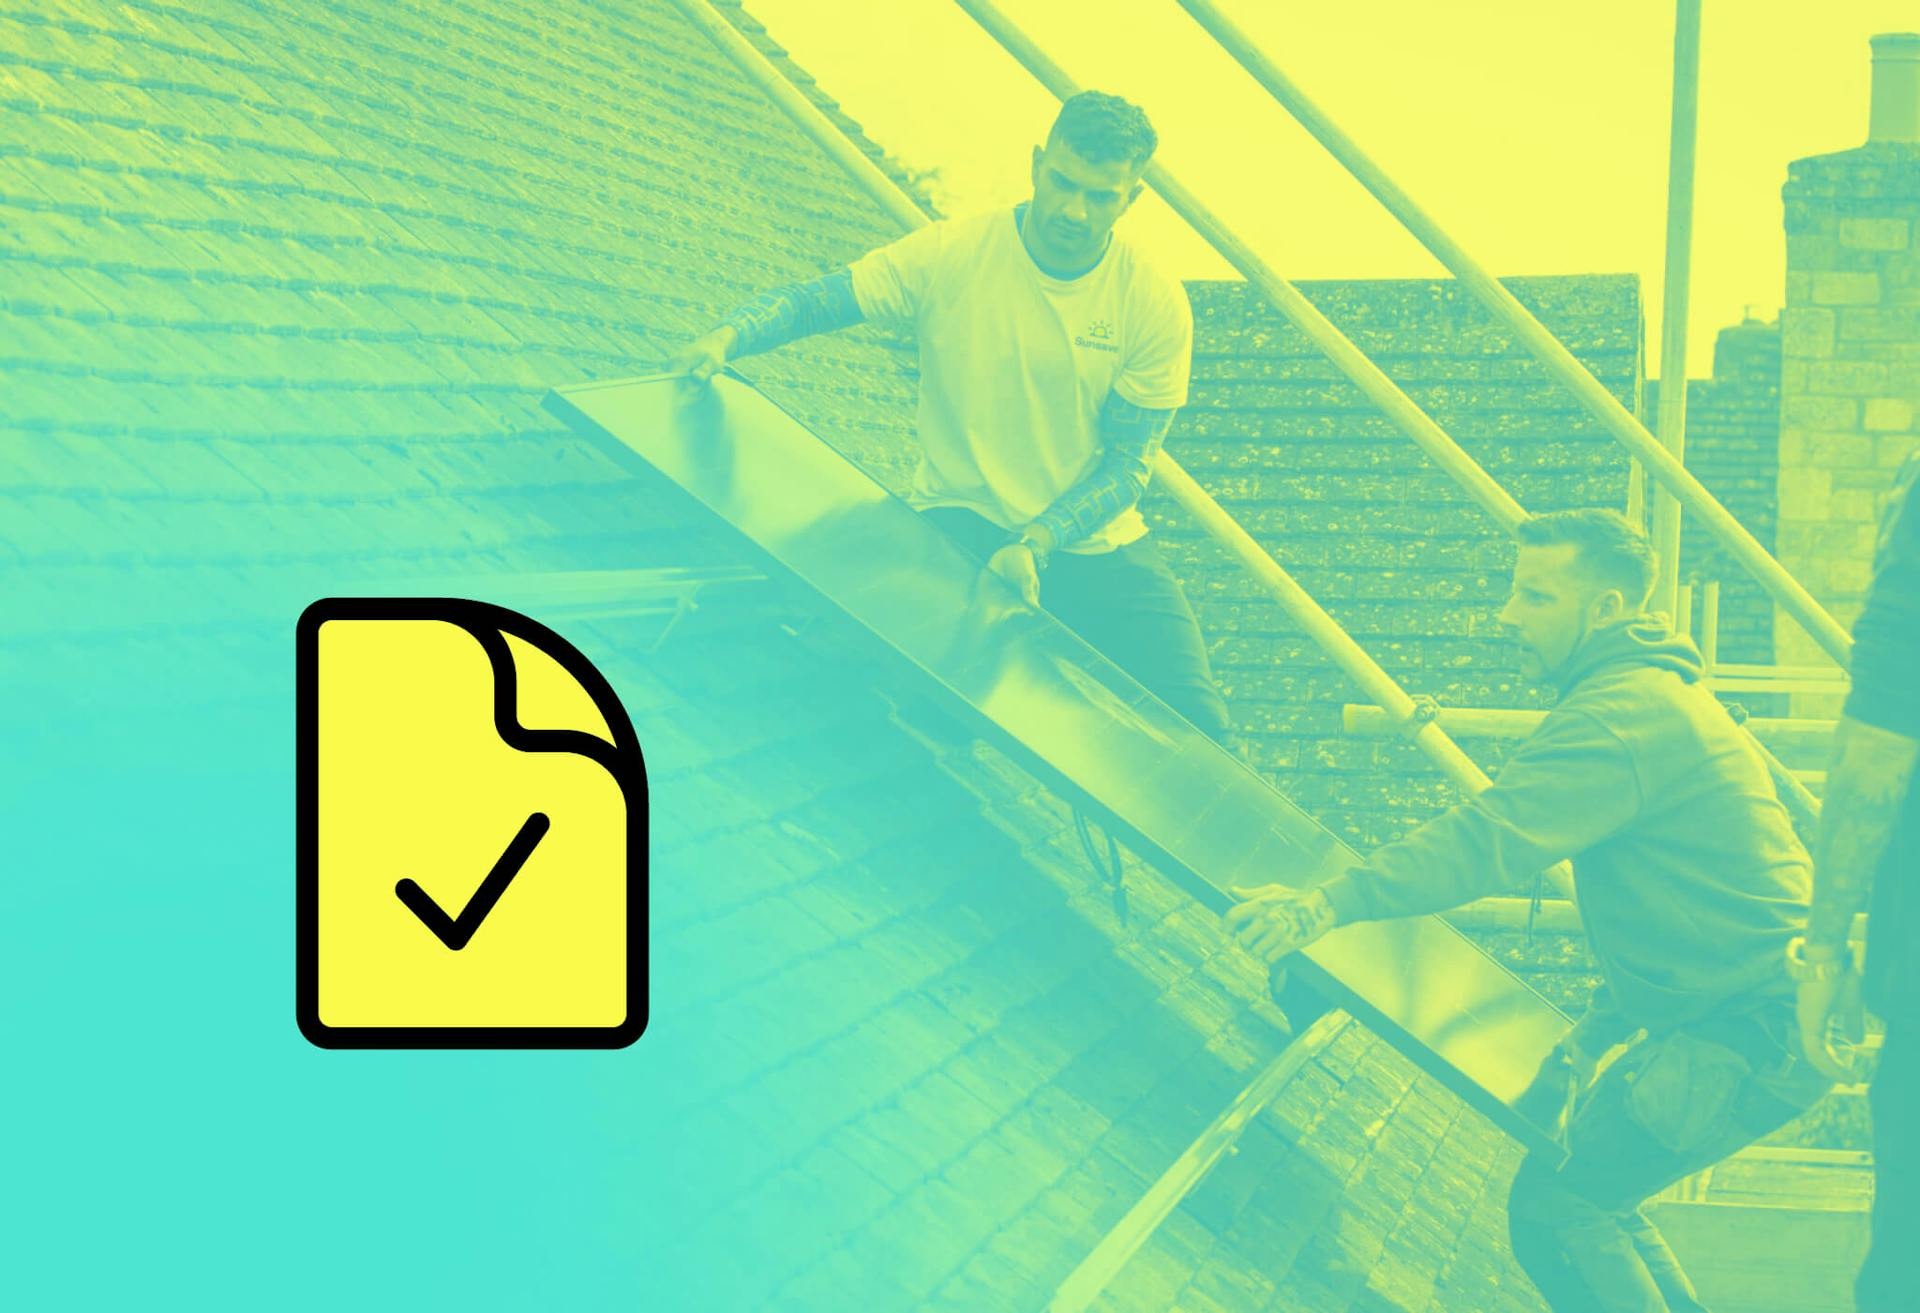 Installers putting a solar panel on a roof against a yellow background, with a cartoon yellow piece of paper in the bottom left corner